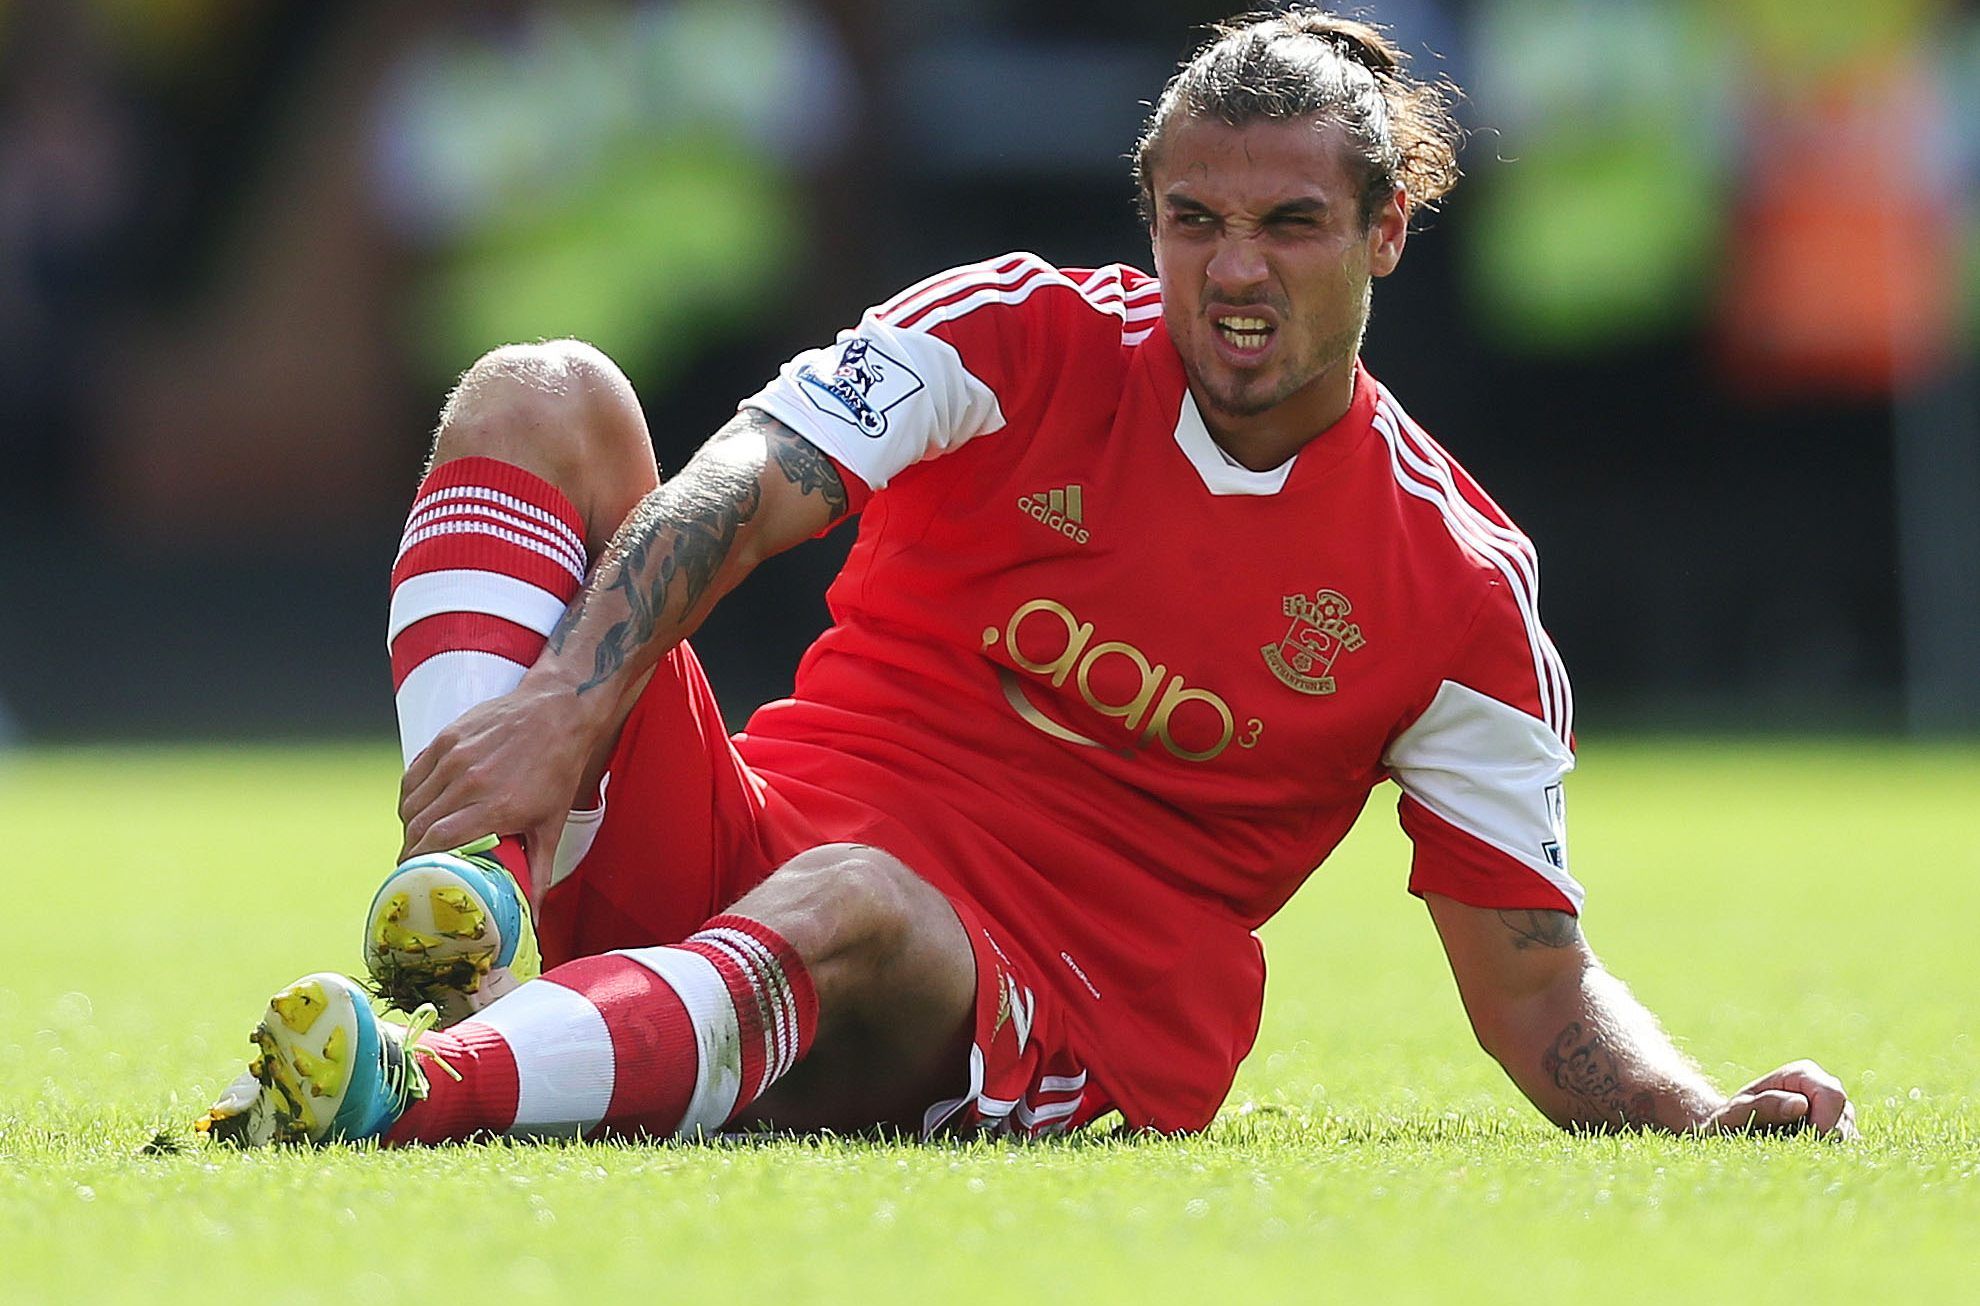 Football - Norwich City v Southampton - Barclays Premier League - Carrow Road - 31/8/13 
Southampton's Daniel Osvaldo sits on the pitch after sustaining an injury 
Mandatory Credit: Action Images / Matthew Childs 
Livepic 
EDITORIAL USE ONLY. No use with unauthorized audio, video, data, fixture lists, club/league logos or live services. Online in-match use limited to 45 images, no video emulation. No use in betting, games or single club/league/player publications.  Please contact your account re